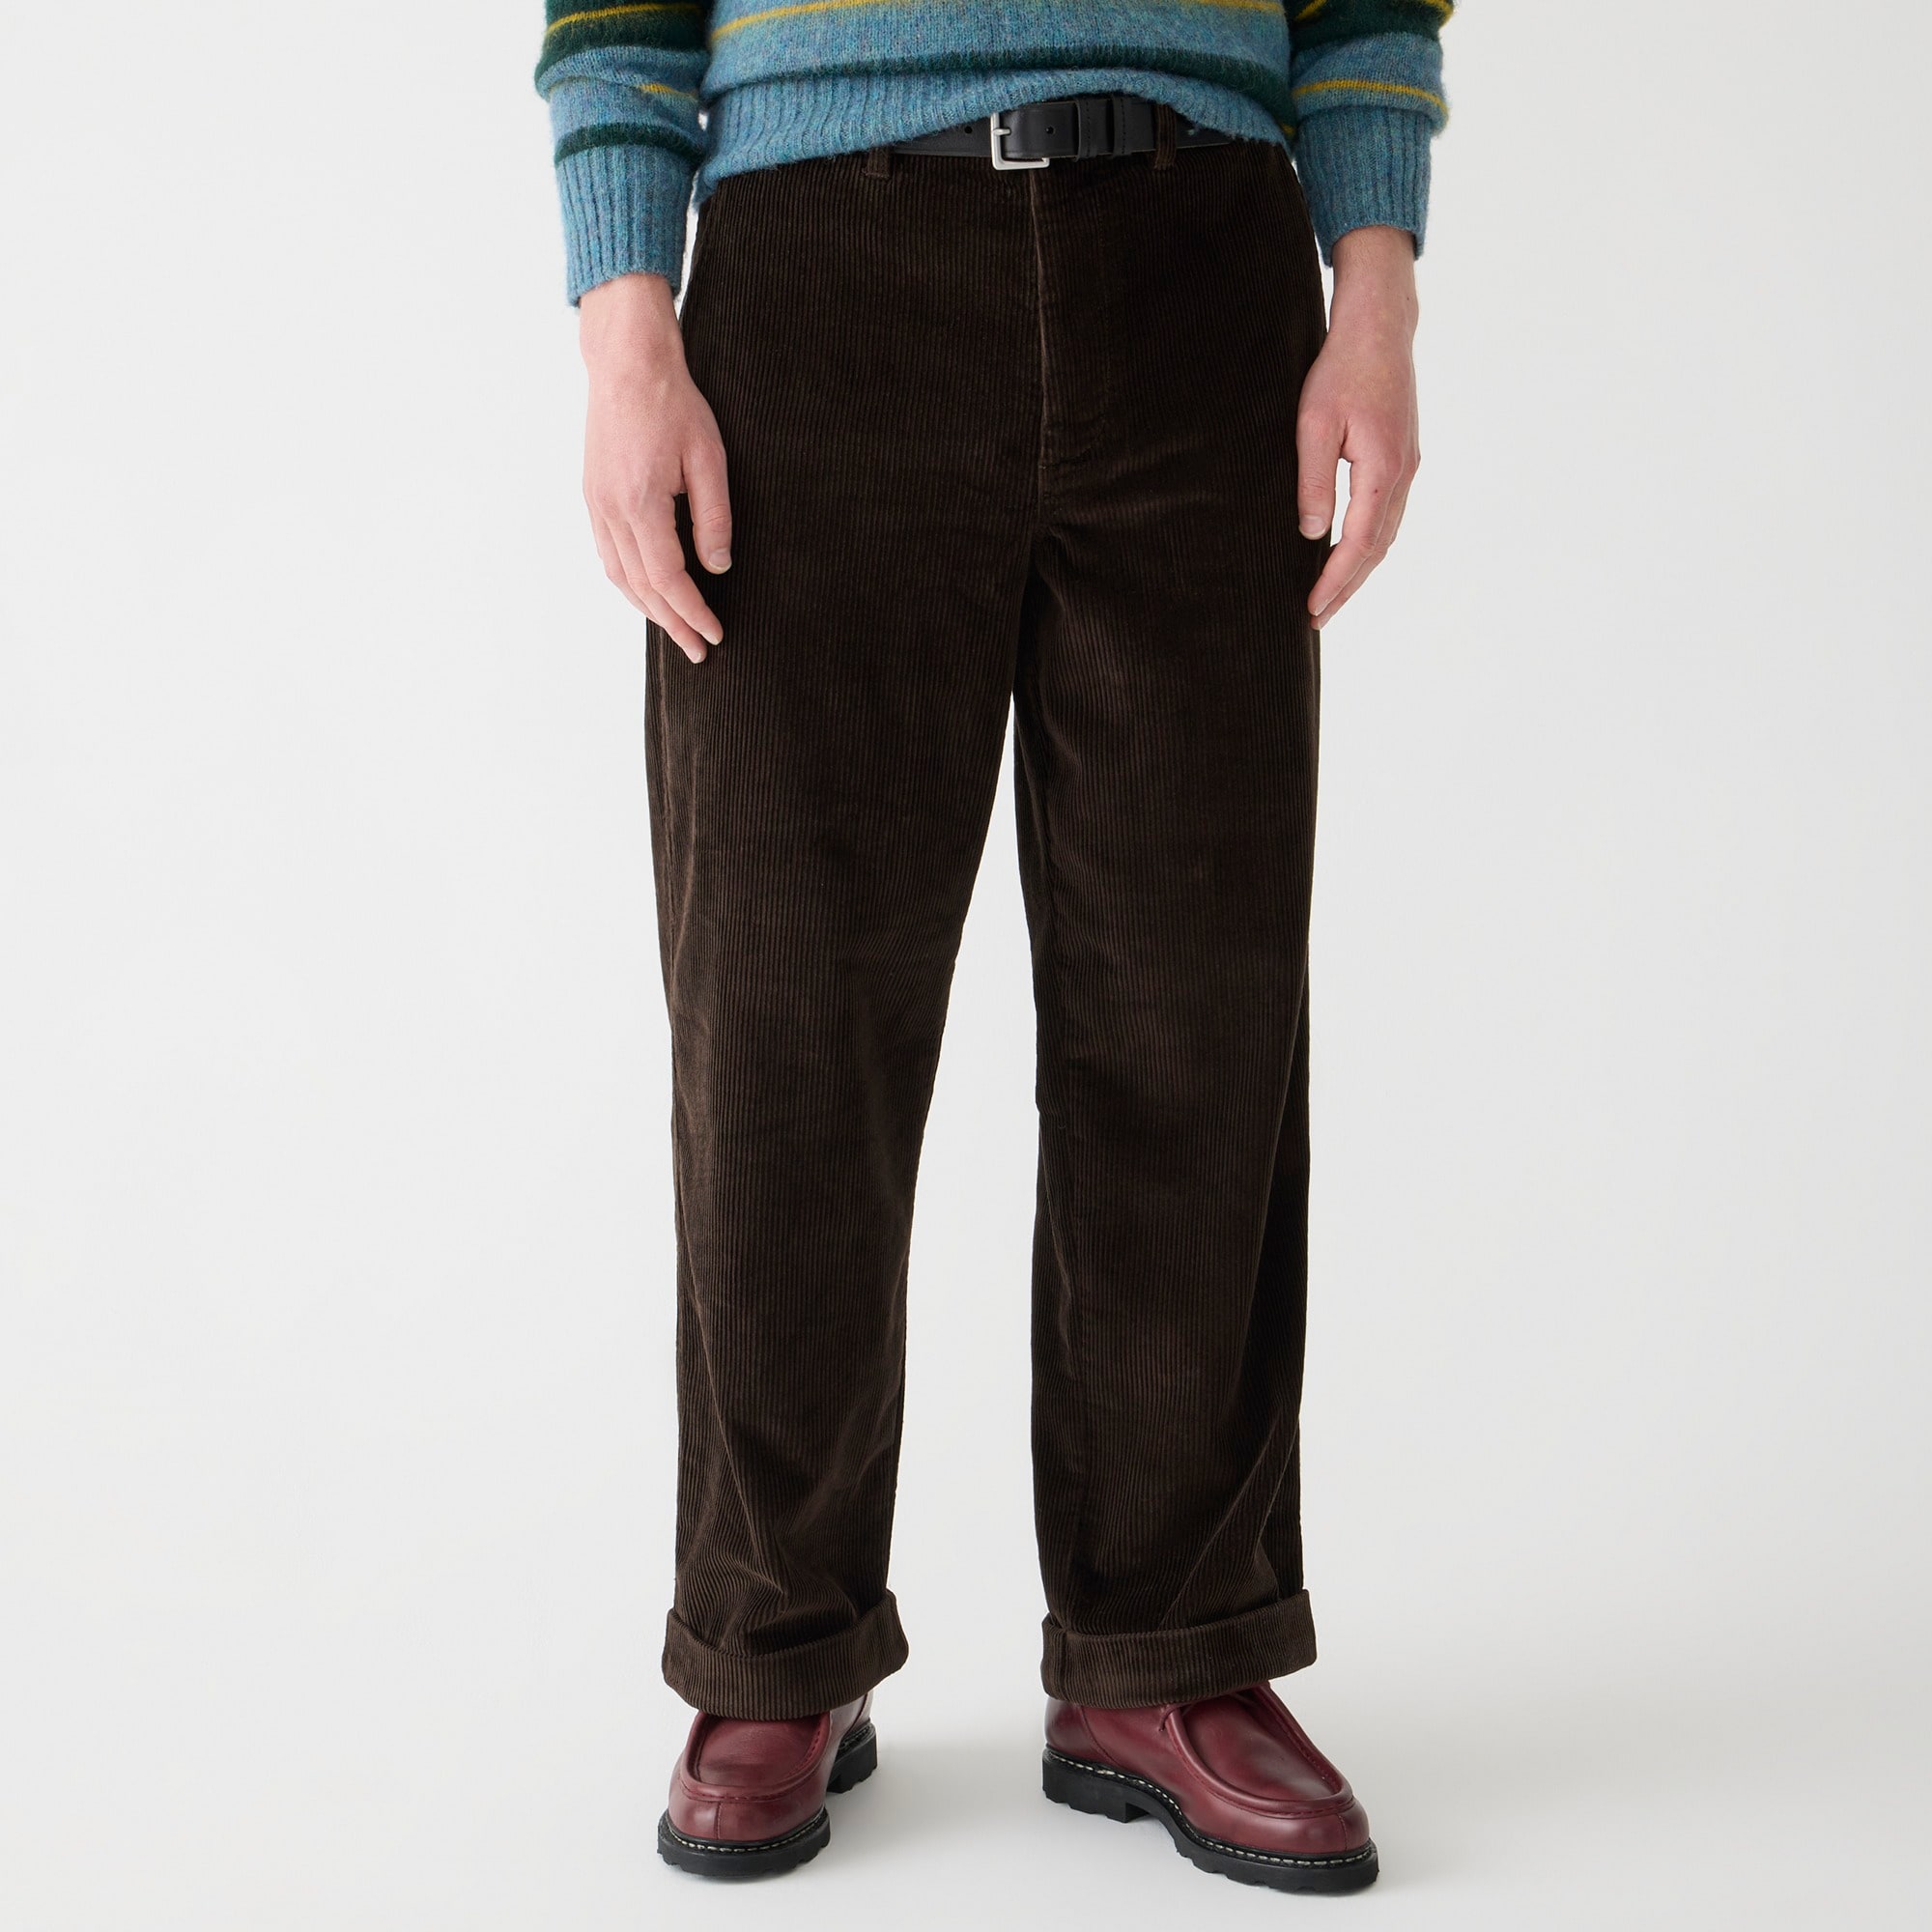 mens Limited-edition Giant-fit corduroy pant